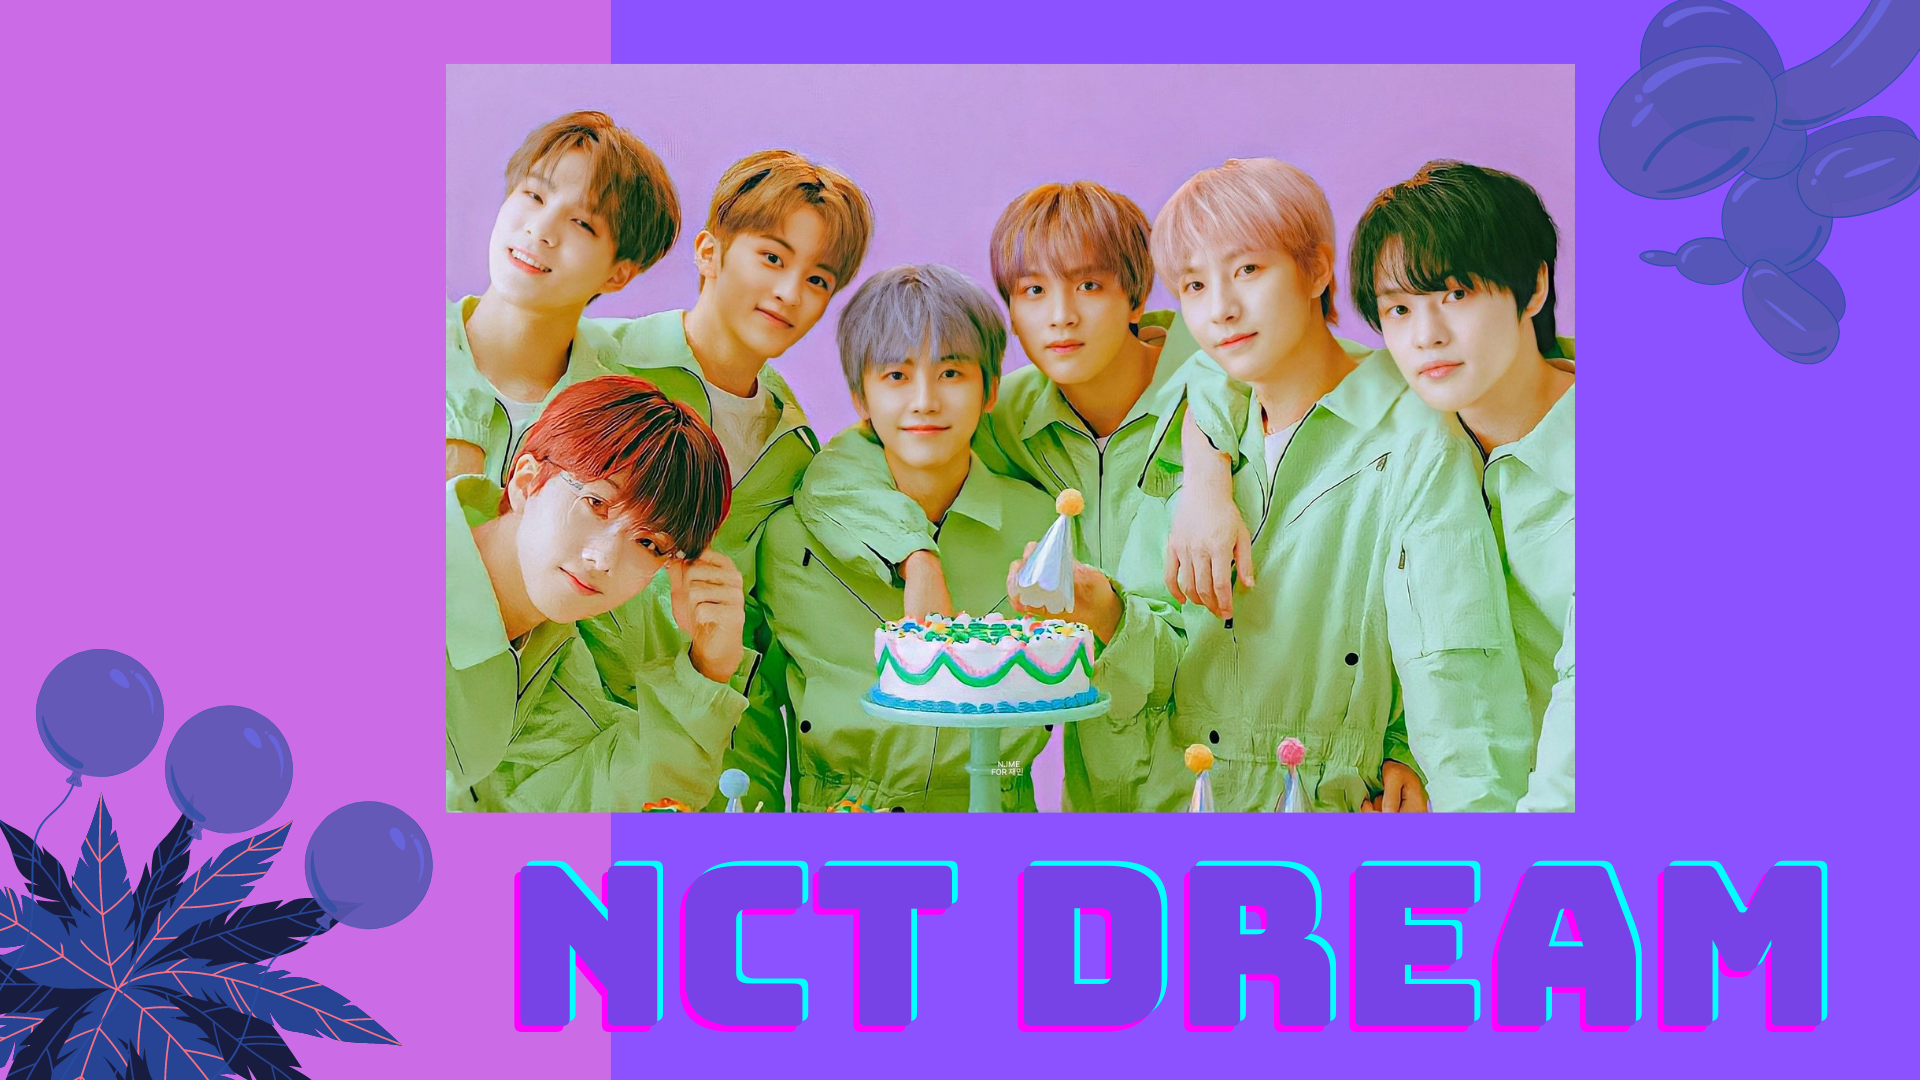 Download Nct Dream Aesthetic Wallpaper Laptop Hd PNG